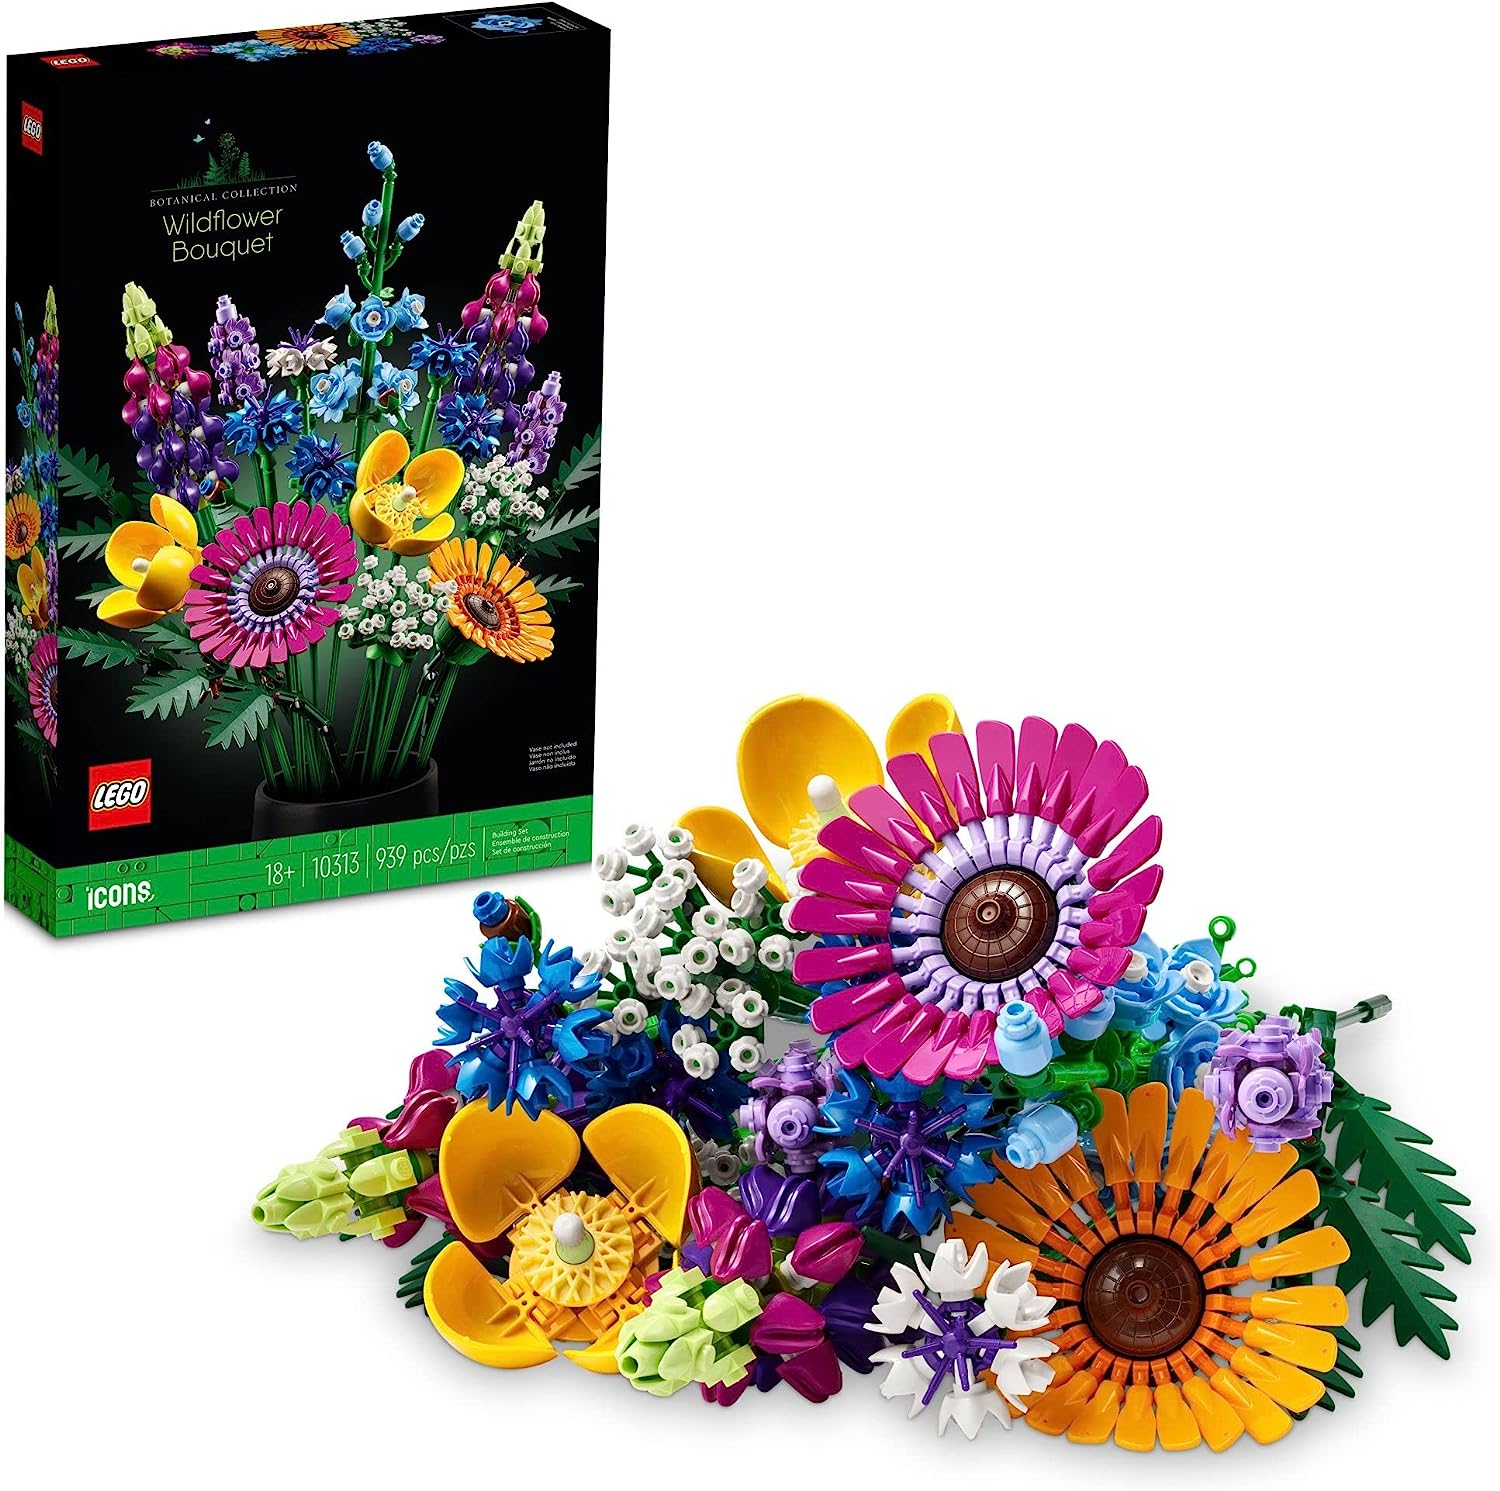 LEGO Icons Wildflower Bouquet Set - Artificial Flowers with Poppies and Lavender, Adult Collection, Unique Mother\\\\\\\\\\\\\\\\\\\\\\\\\\\\\\\'s Day Decoration, Botanical Piece for Anniversary or Gift for Mother\\\\\\\\\\\\\\\\\\\\\\\\\\\\\\\'s Day, 10313